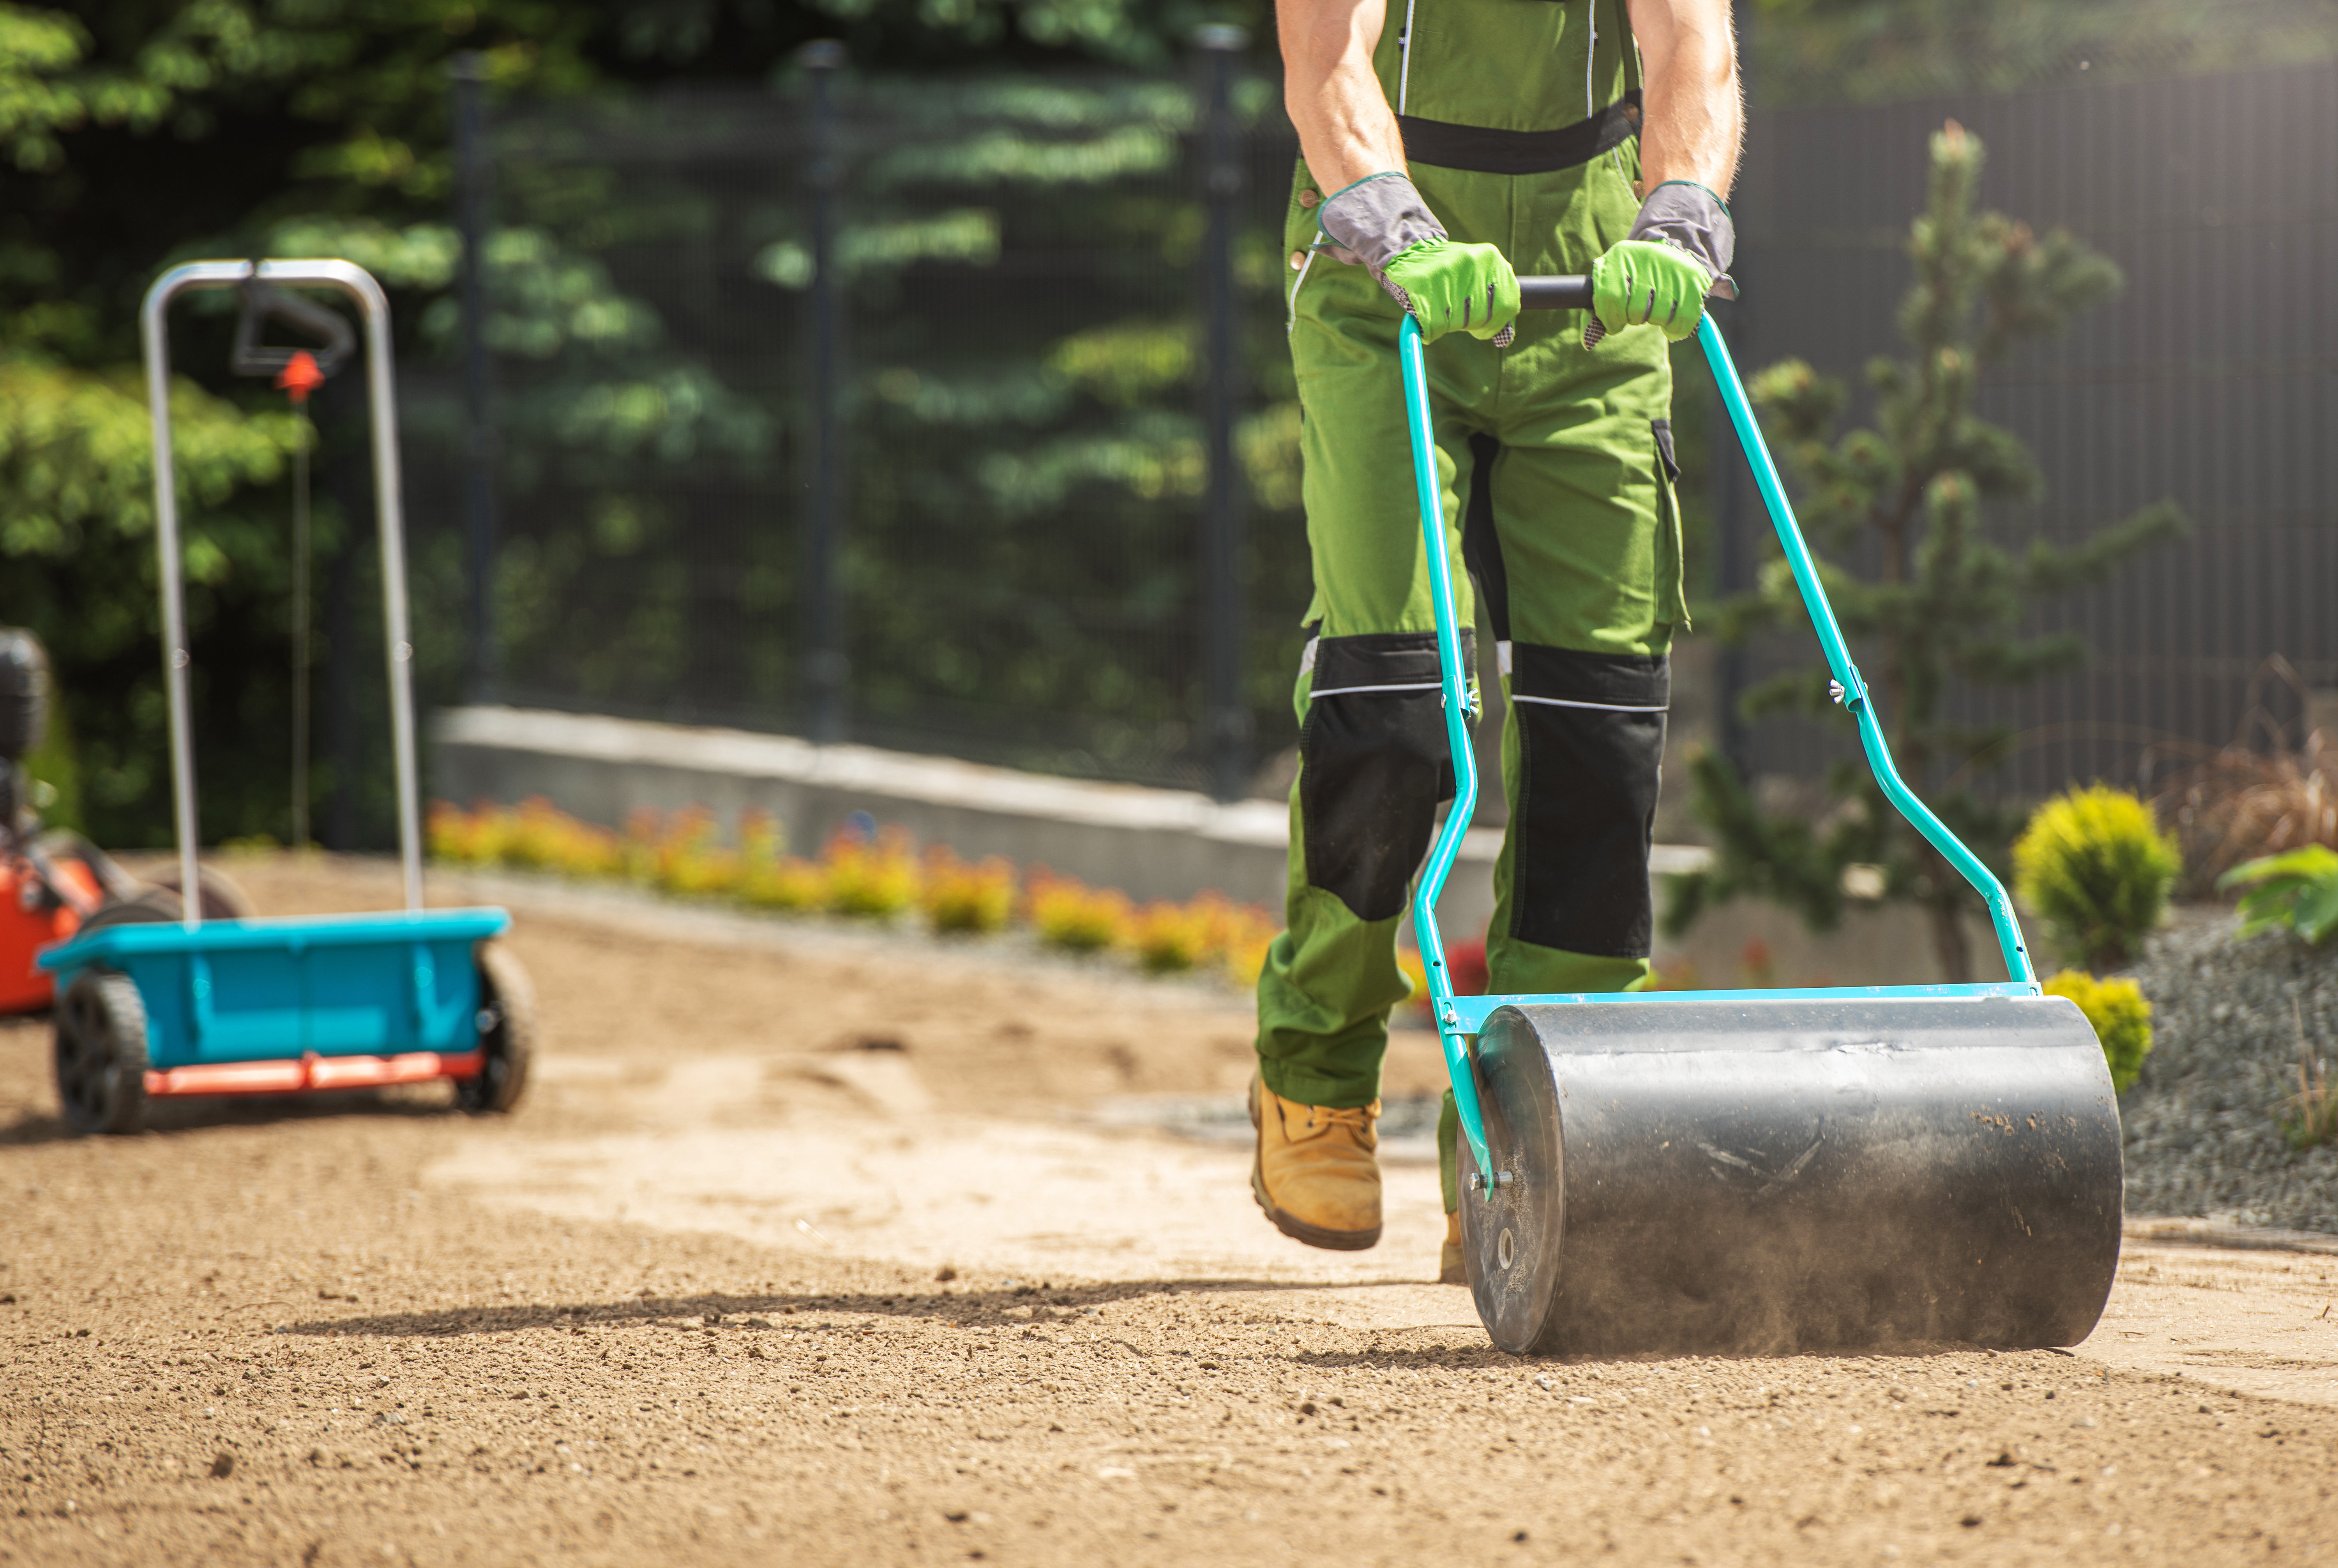 A crew member from one of the Best Landscaping Contractors in Ottawa can be seen dressed in green work trousers with black knee pads. He is  pushing a lawn roller over crushed gravel seen in a pathway setting. In the background, there is a green forest and a spare seed dispenser on wheels.